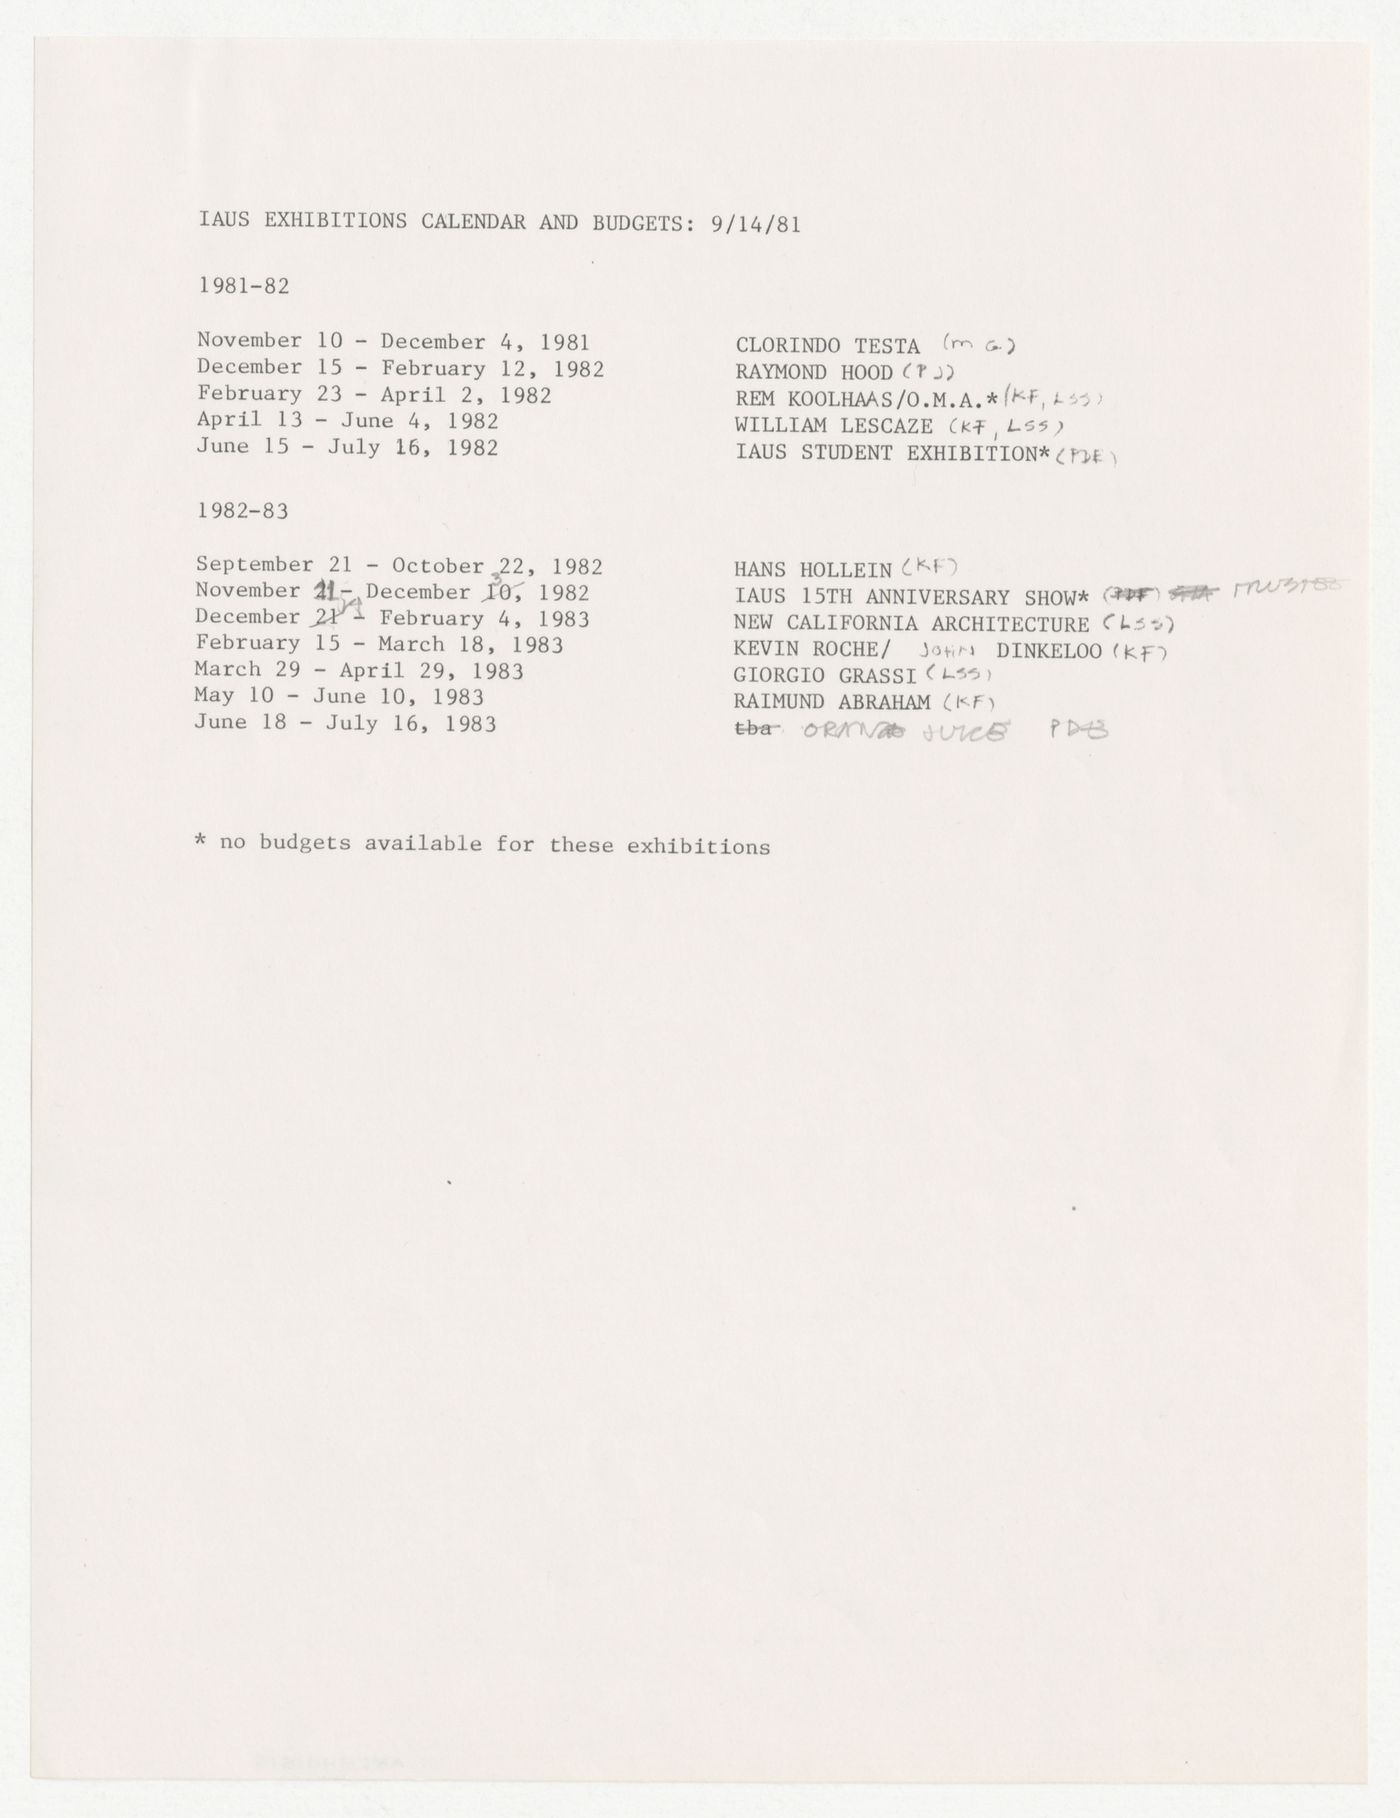 Exhibition calendar with annotations by Peter D. Eisenman